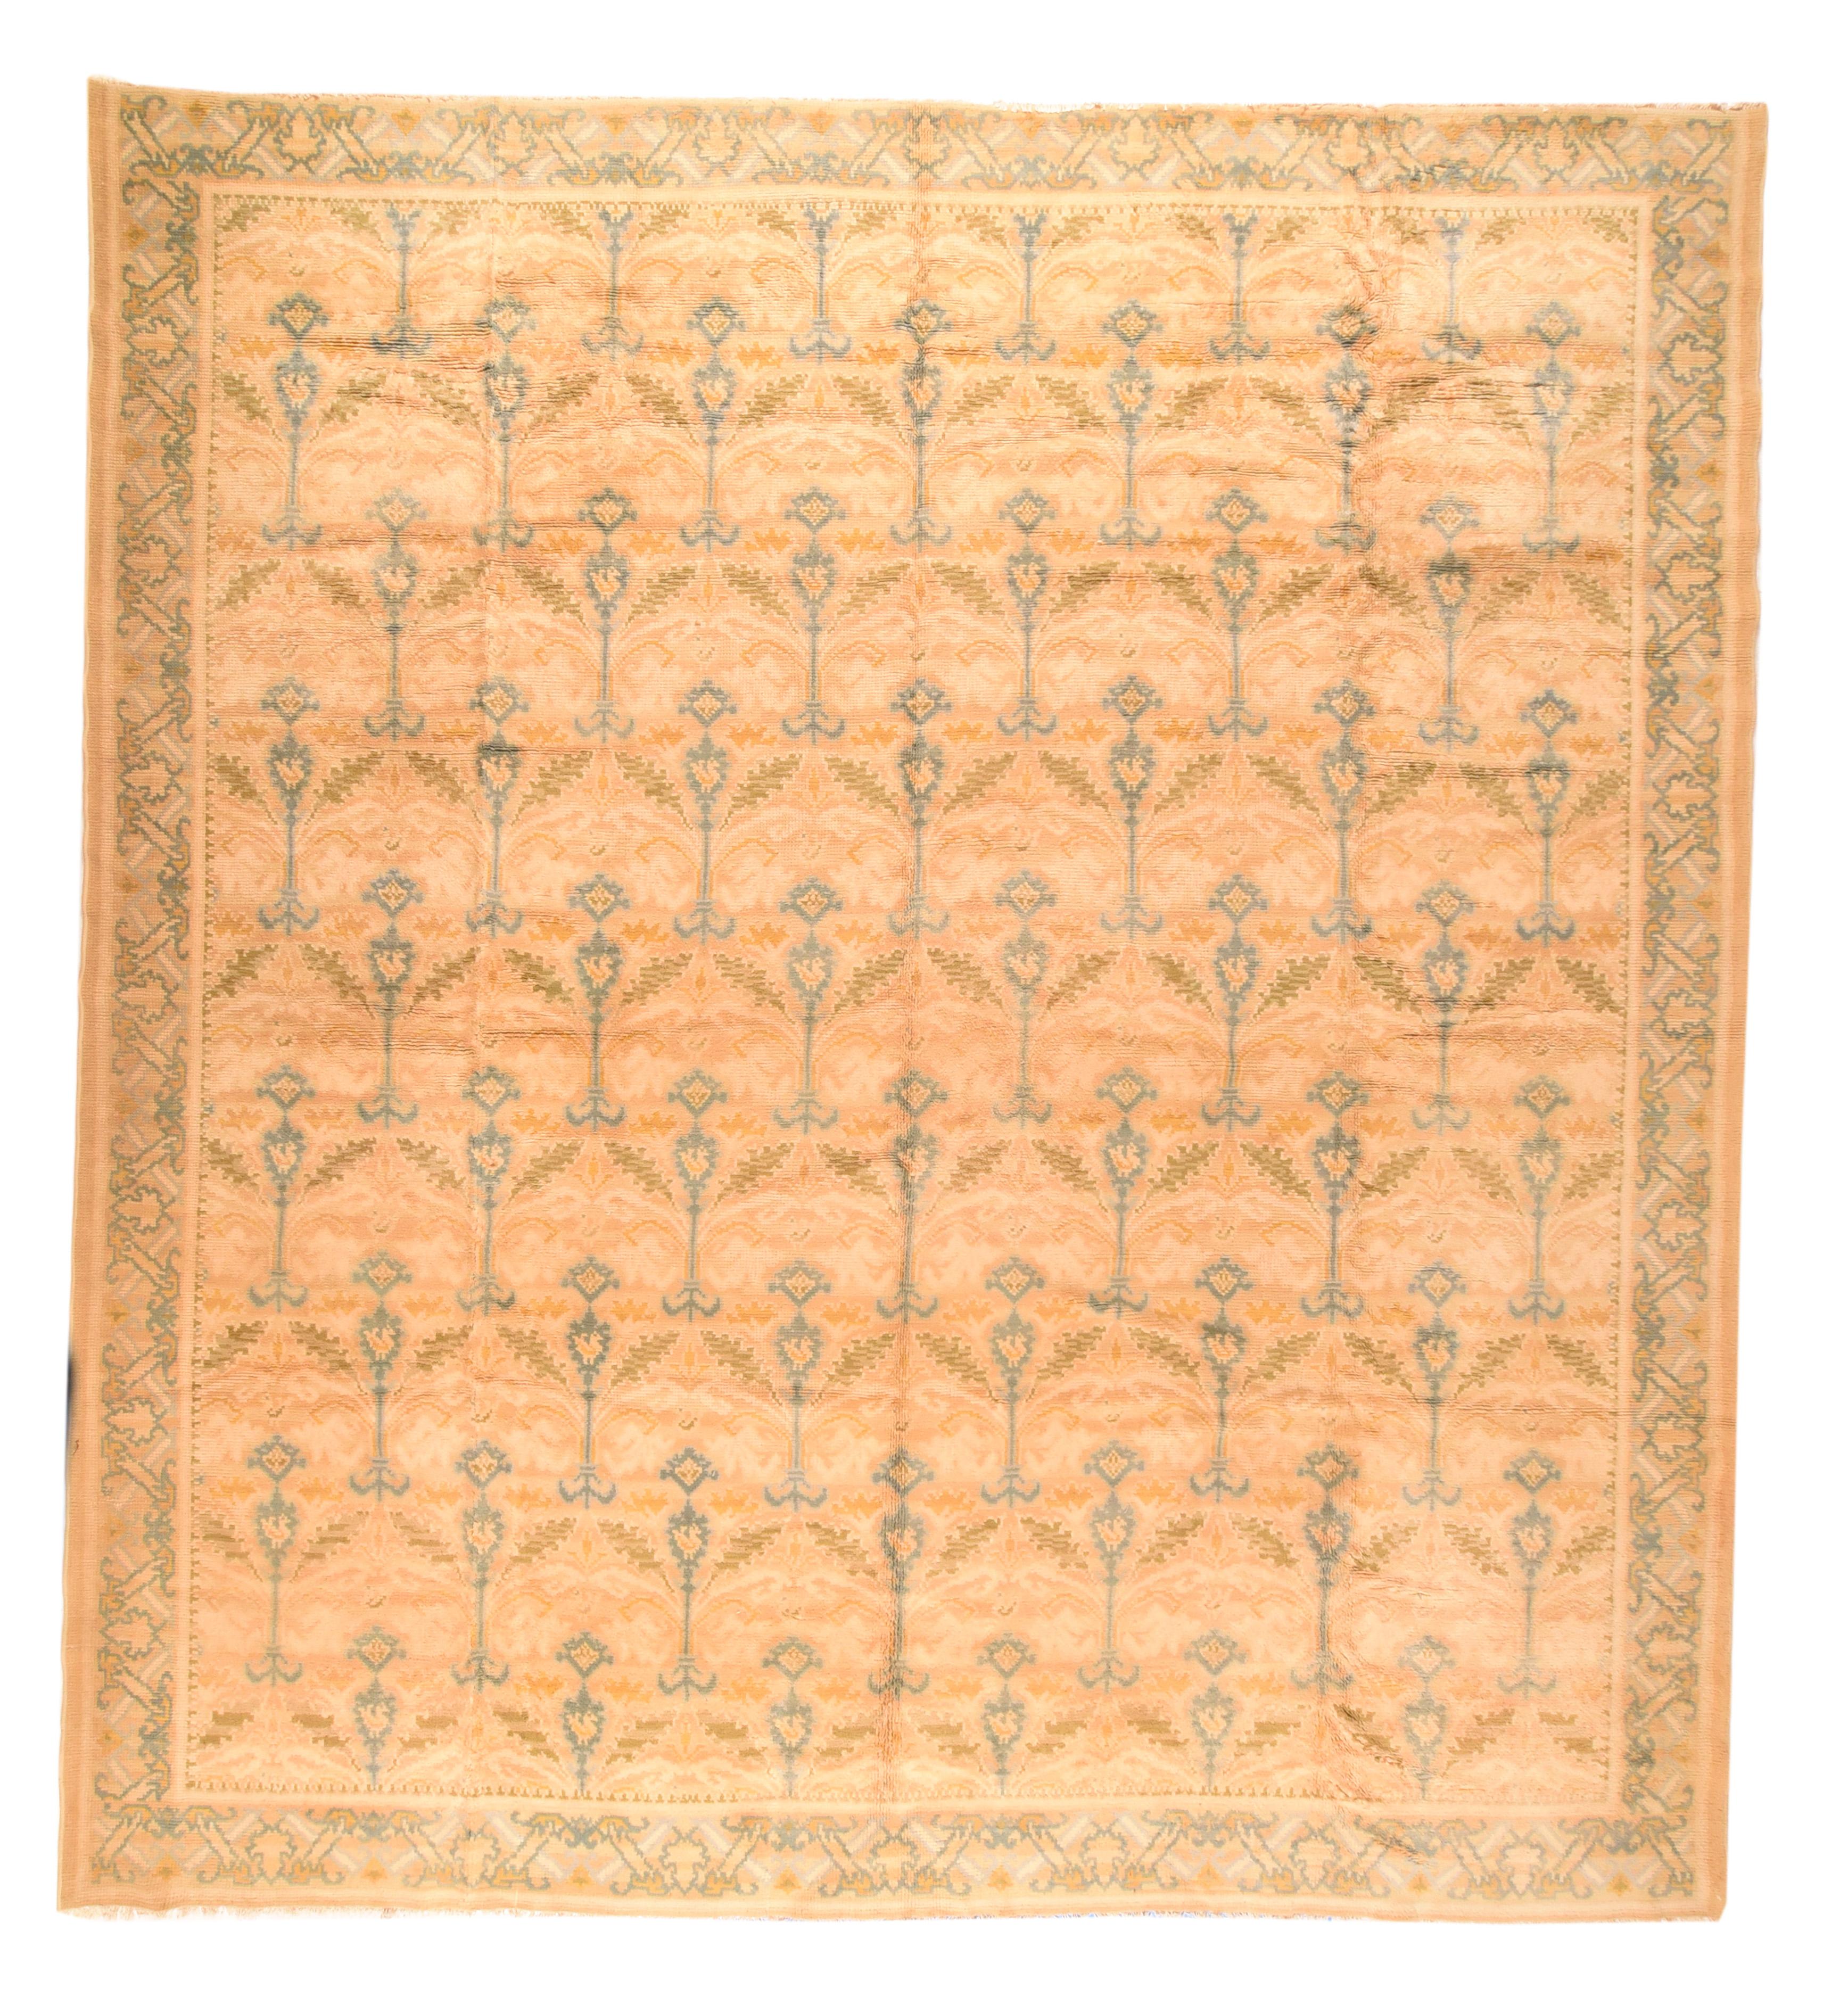 Savonnerie Rug In Excellent Condition For Sale In New York, NY